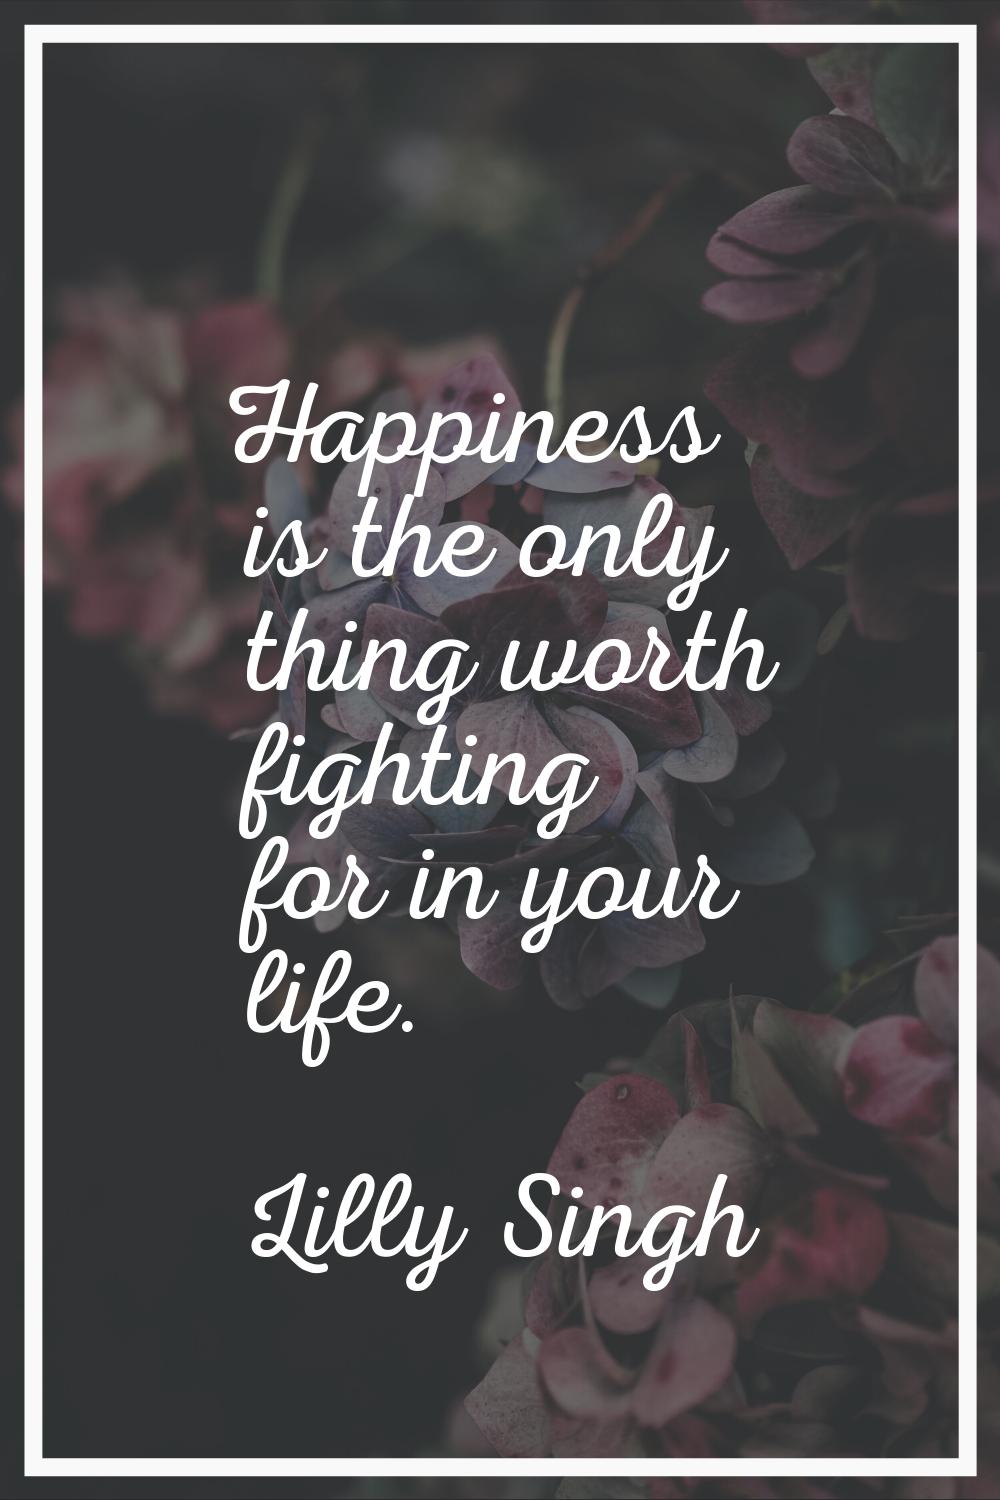 Happiness is the only thing worth fighting for in your life.